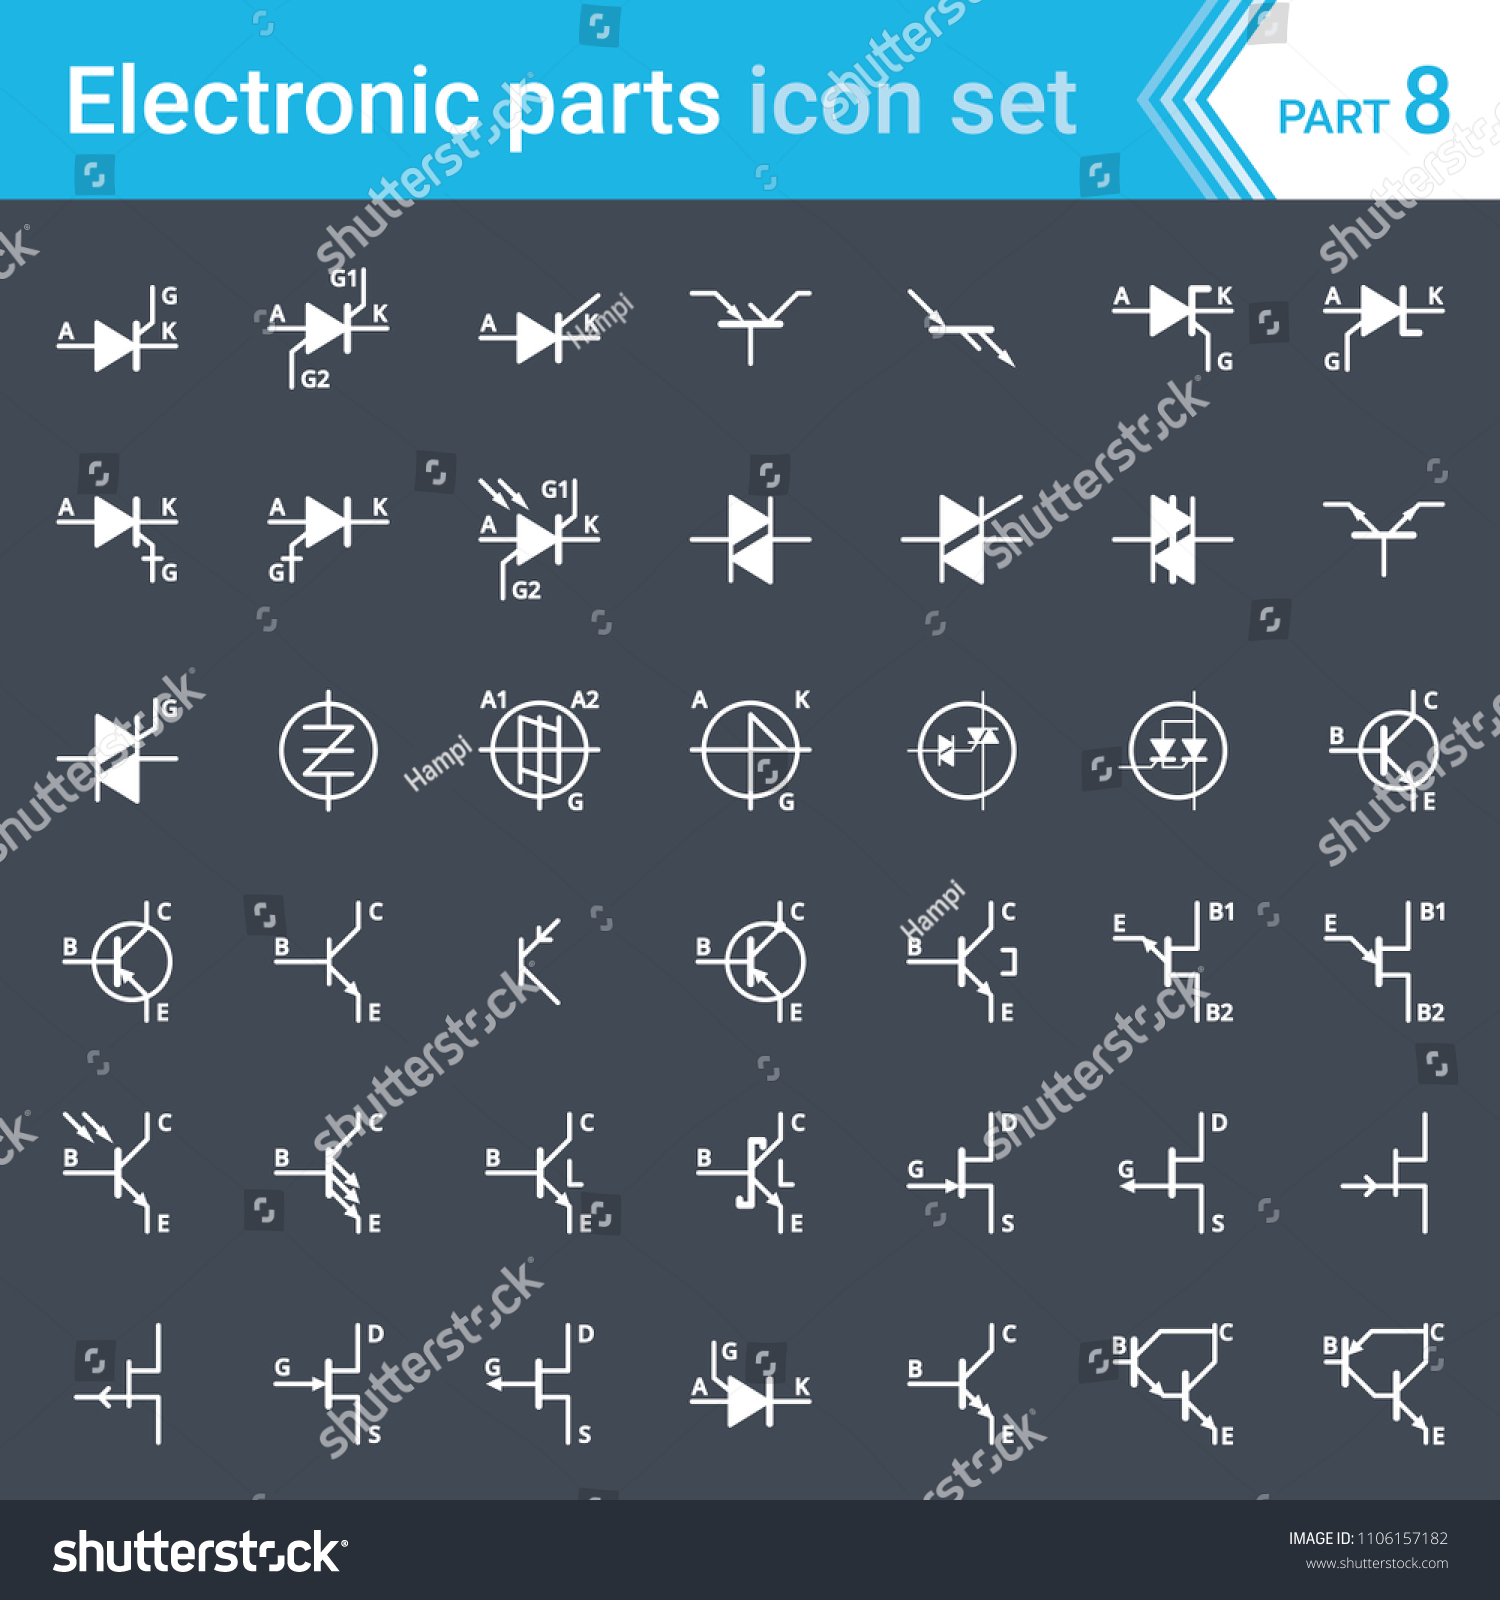 electric-electronic-icons-electric-diagram-symbols-stock-vector